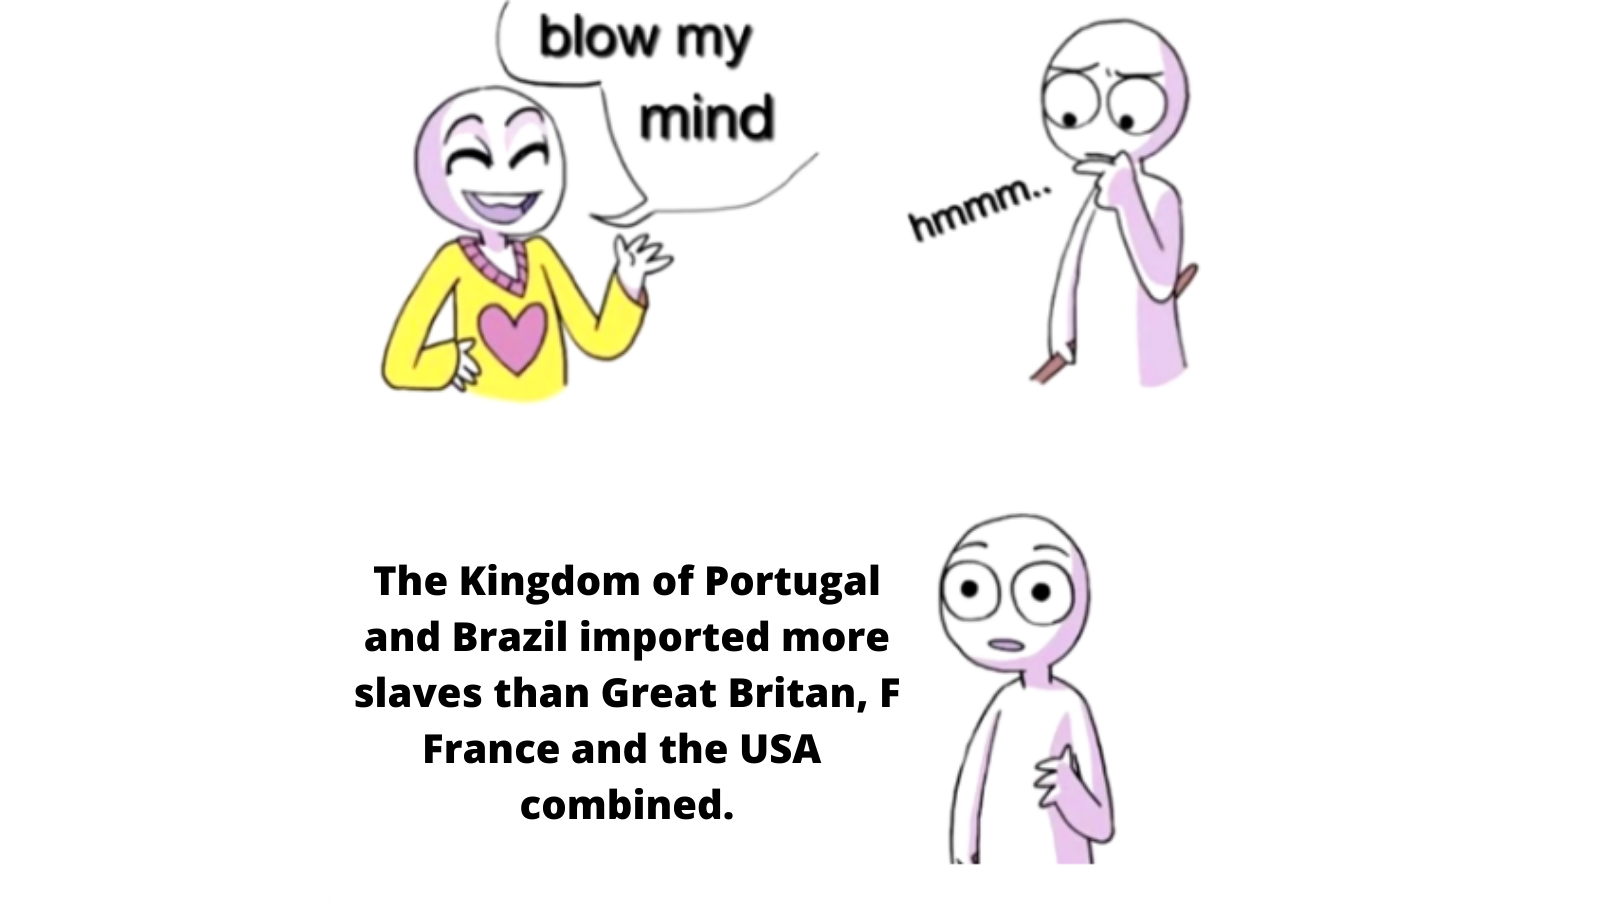 Portugal imported c. 5.5 million slaves compared to the others 5.1 million